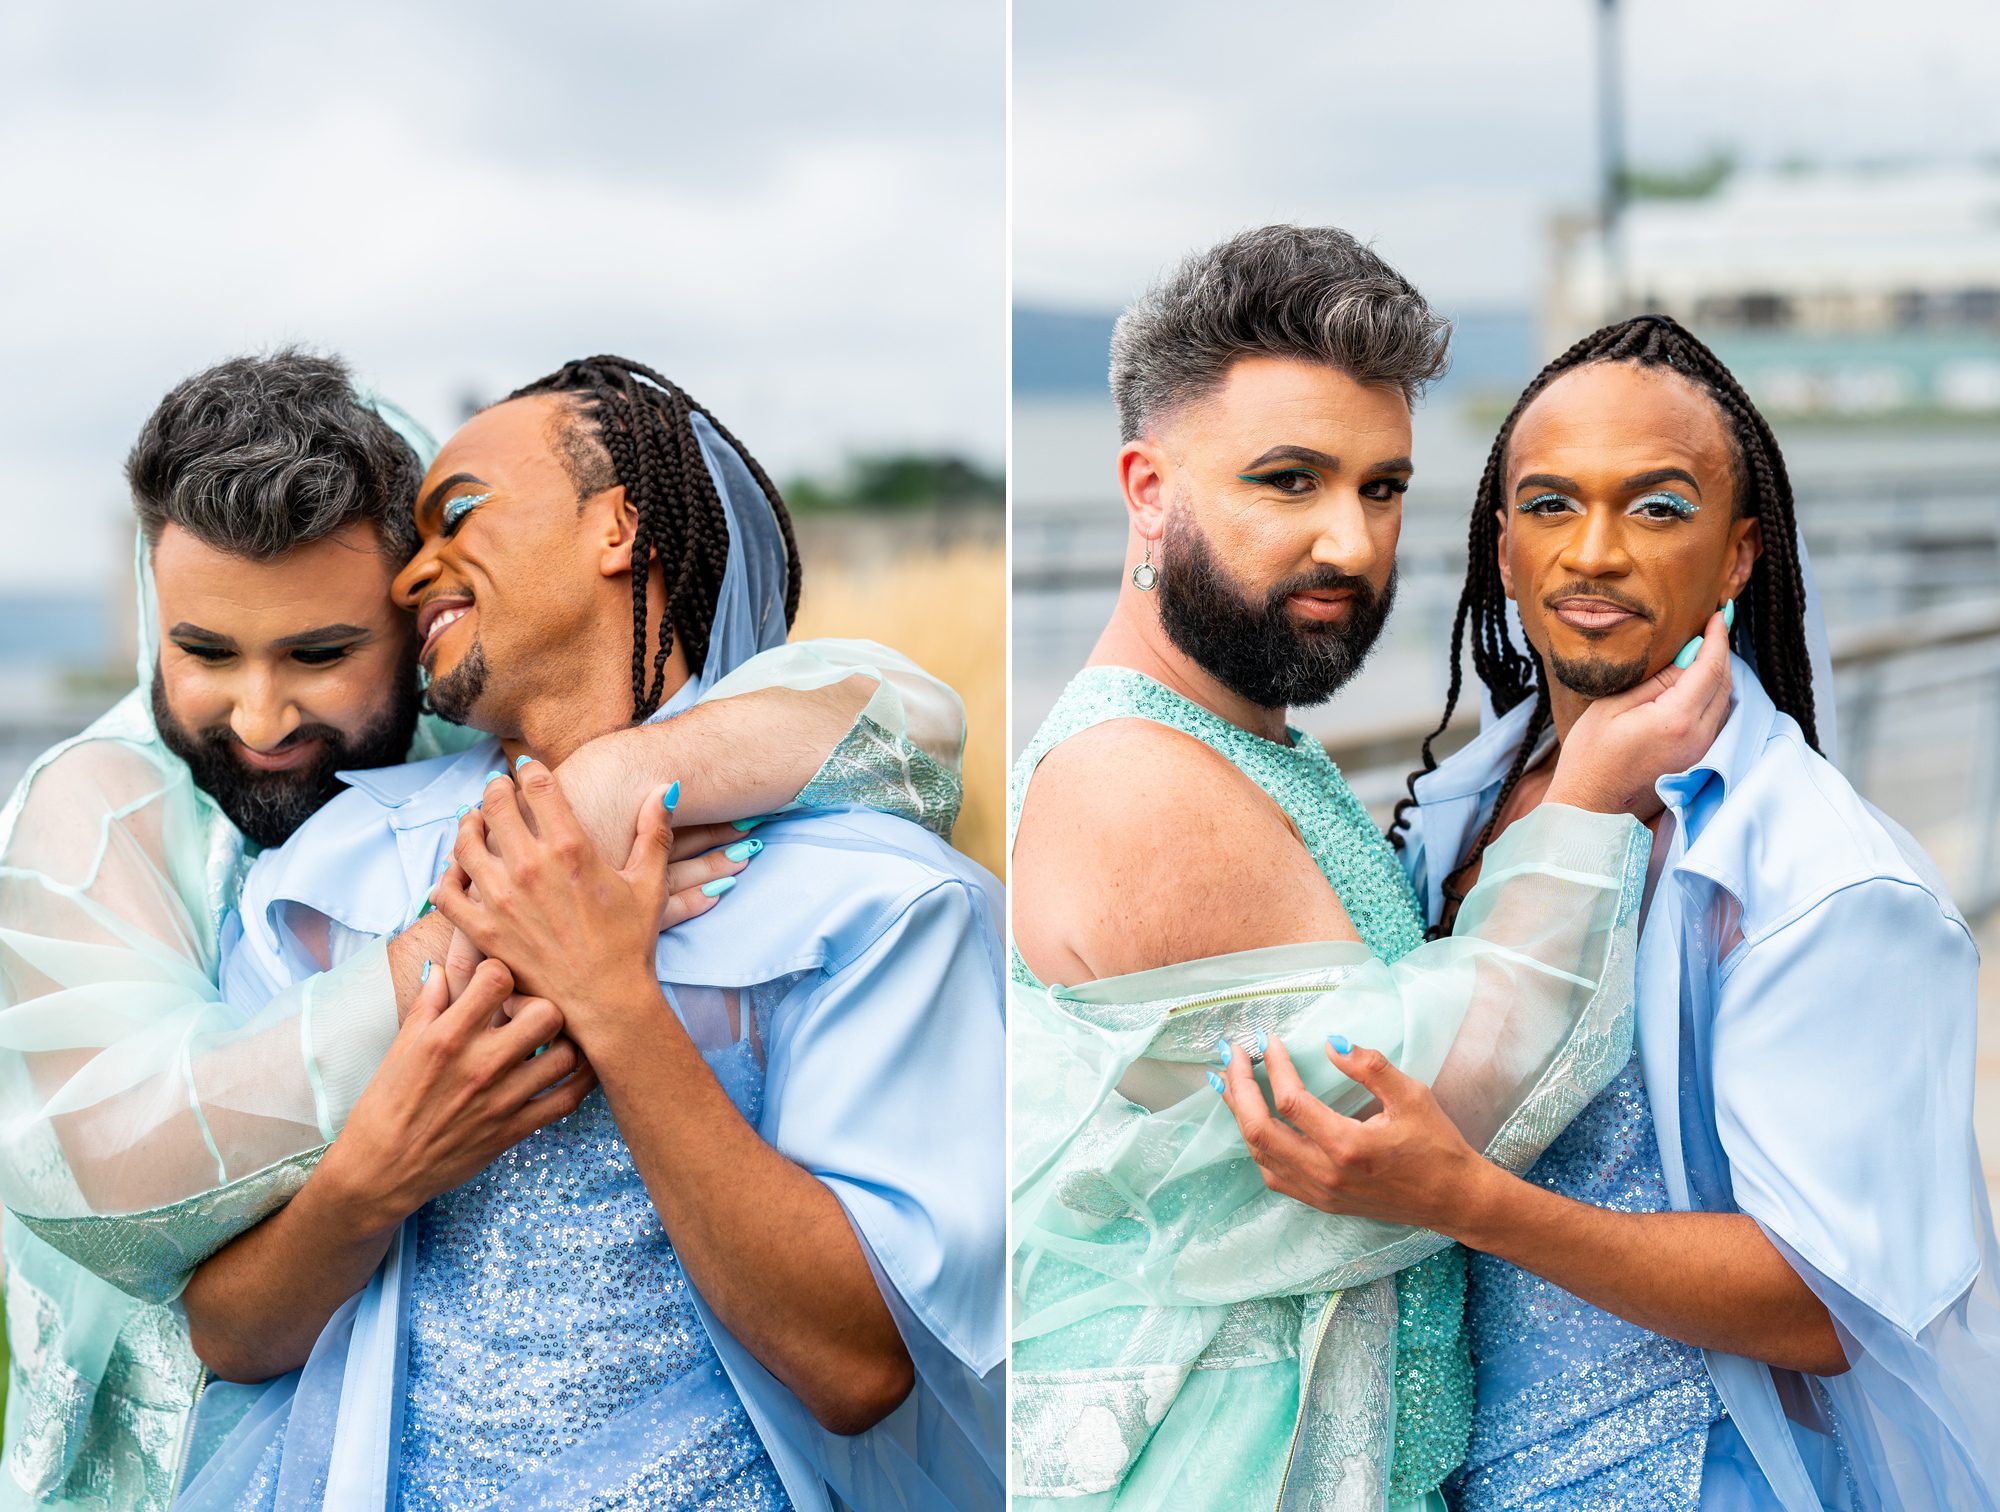 Two grooms taking wedding photos wearing very sparkly outfits snuggling and looking at the camera. 